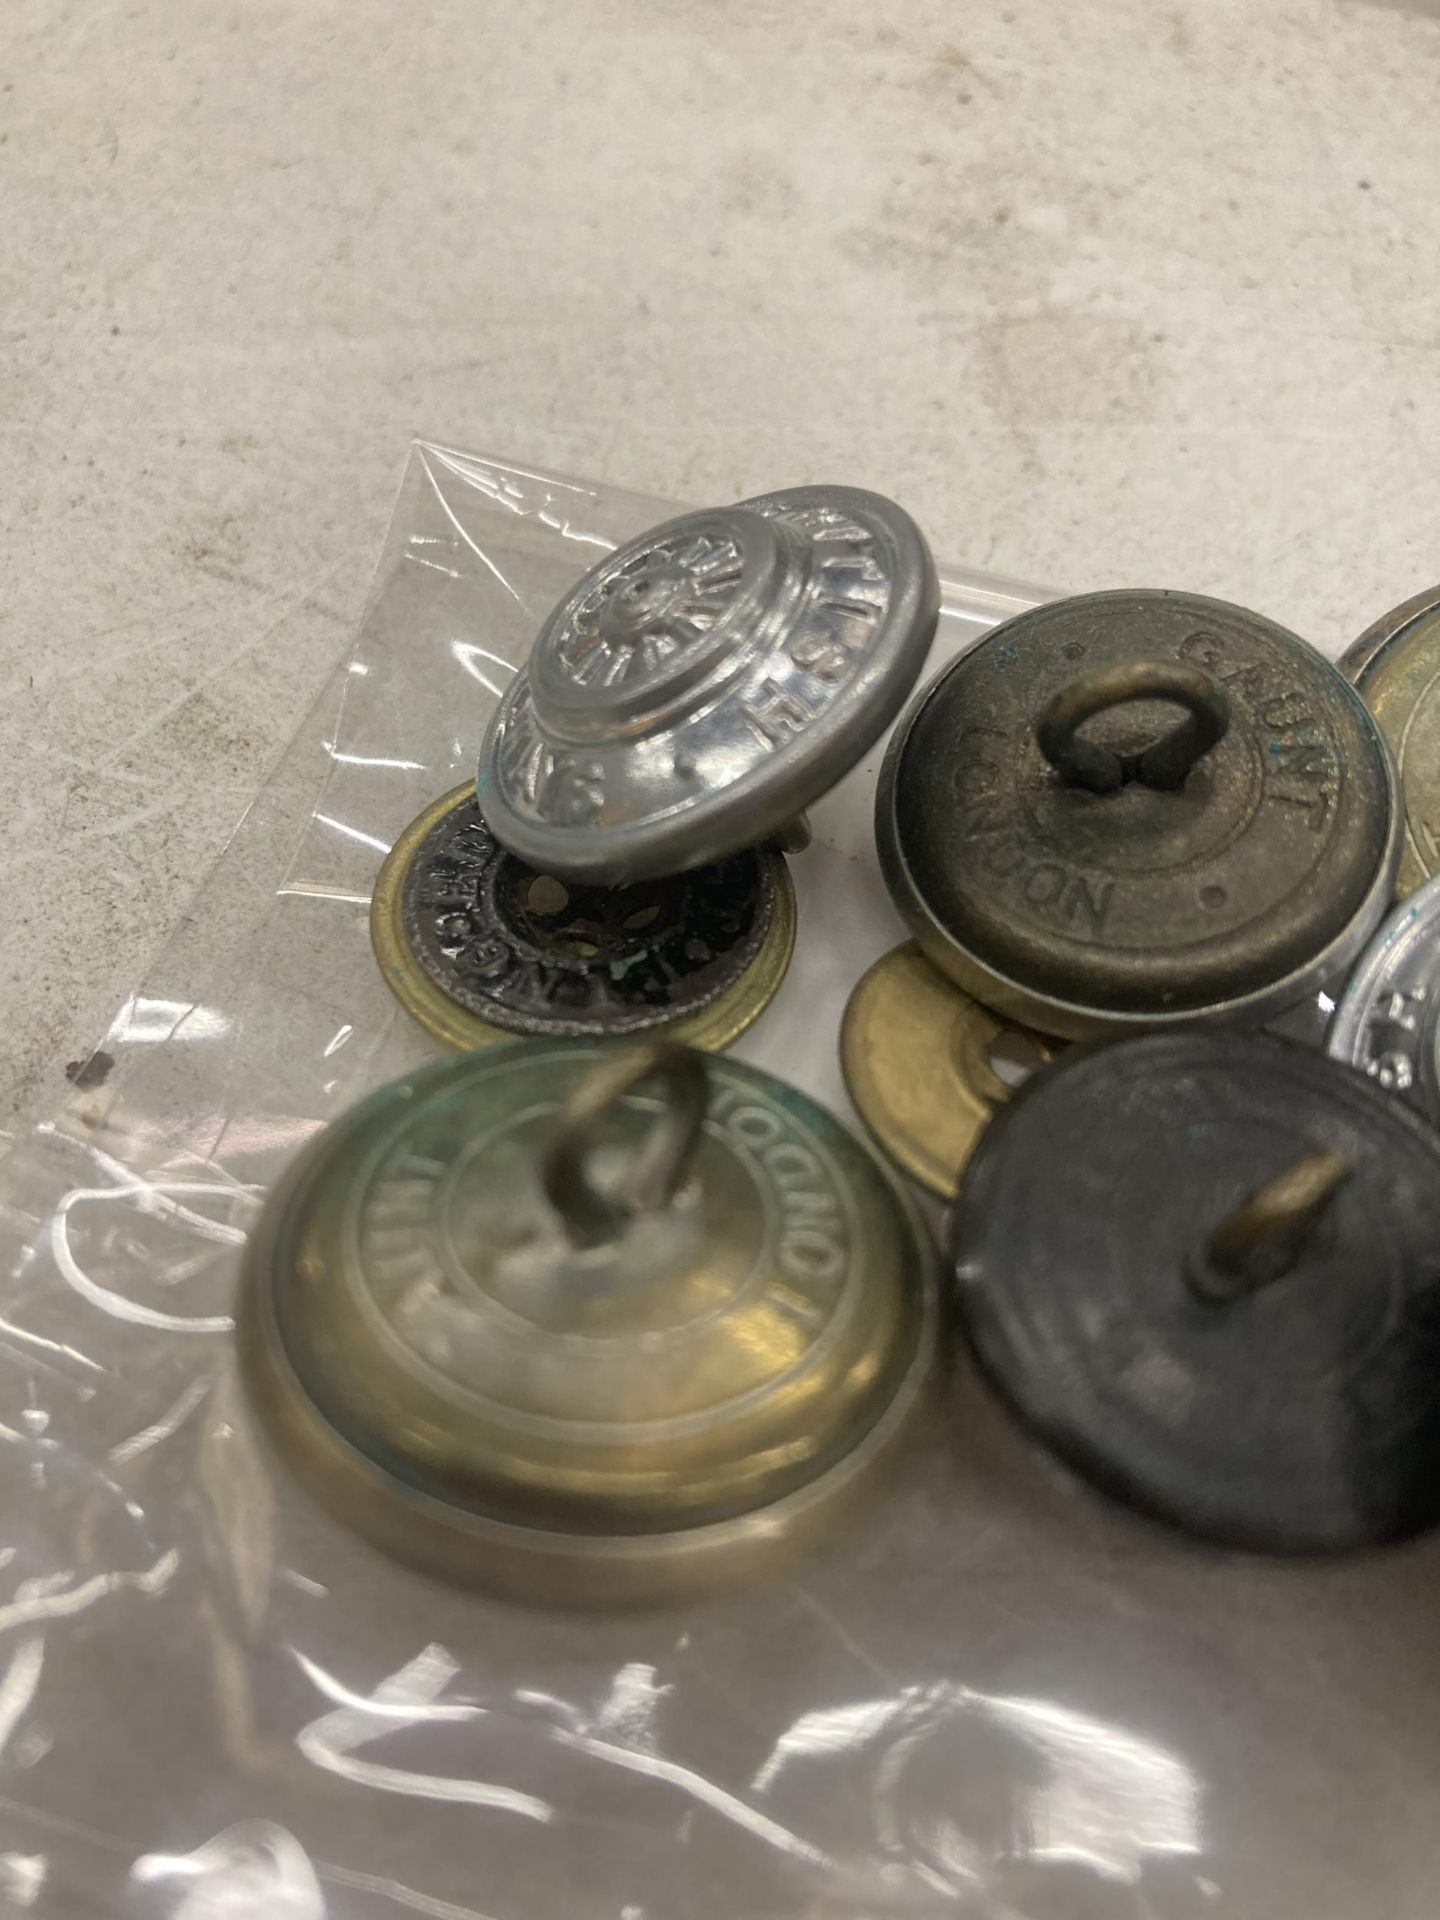 A QUANTITY OF BRITISH RAIL BUTTONS - Image 2 of 3